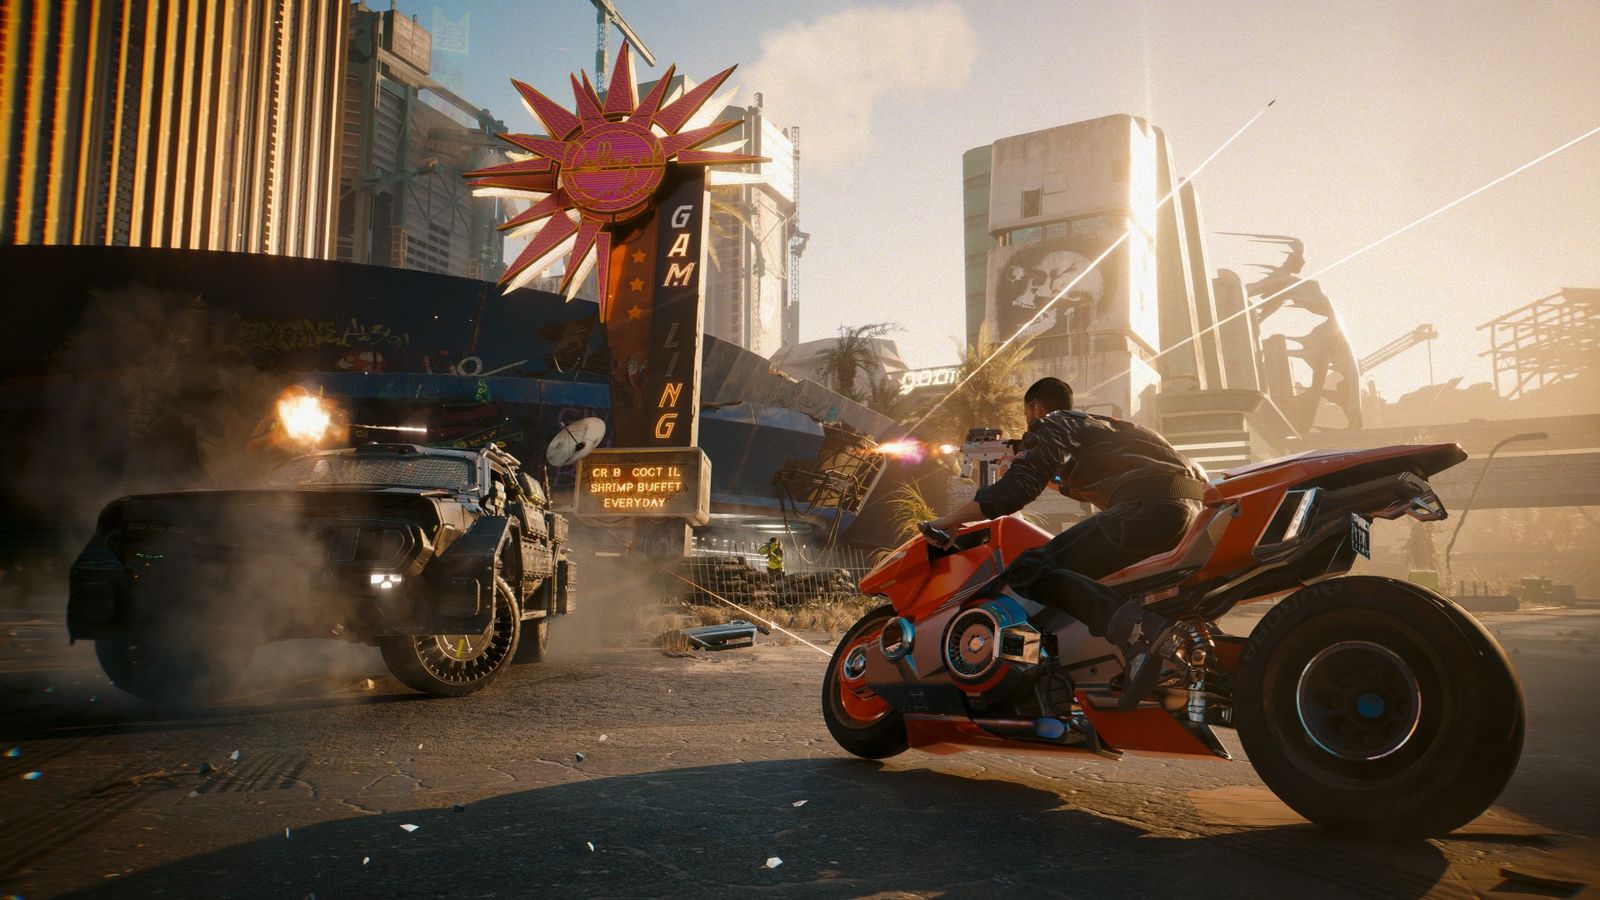 Cyberpunk 2077 players fighting while driving cars and riding motorbikes